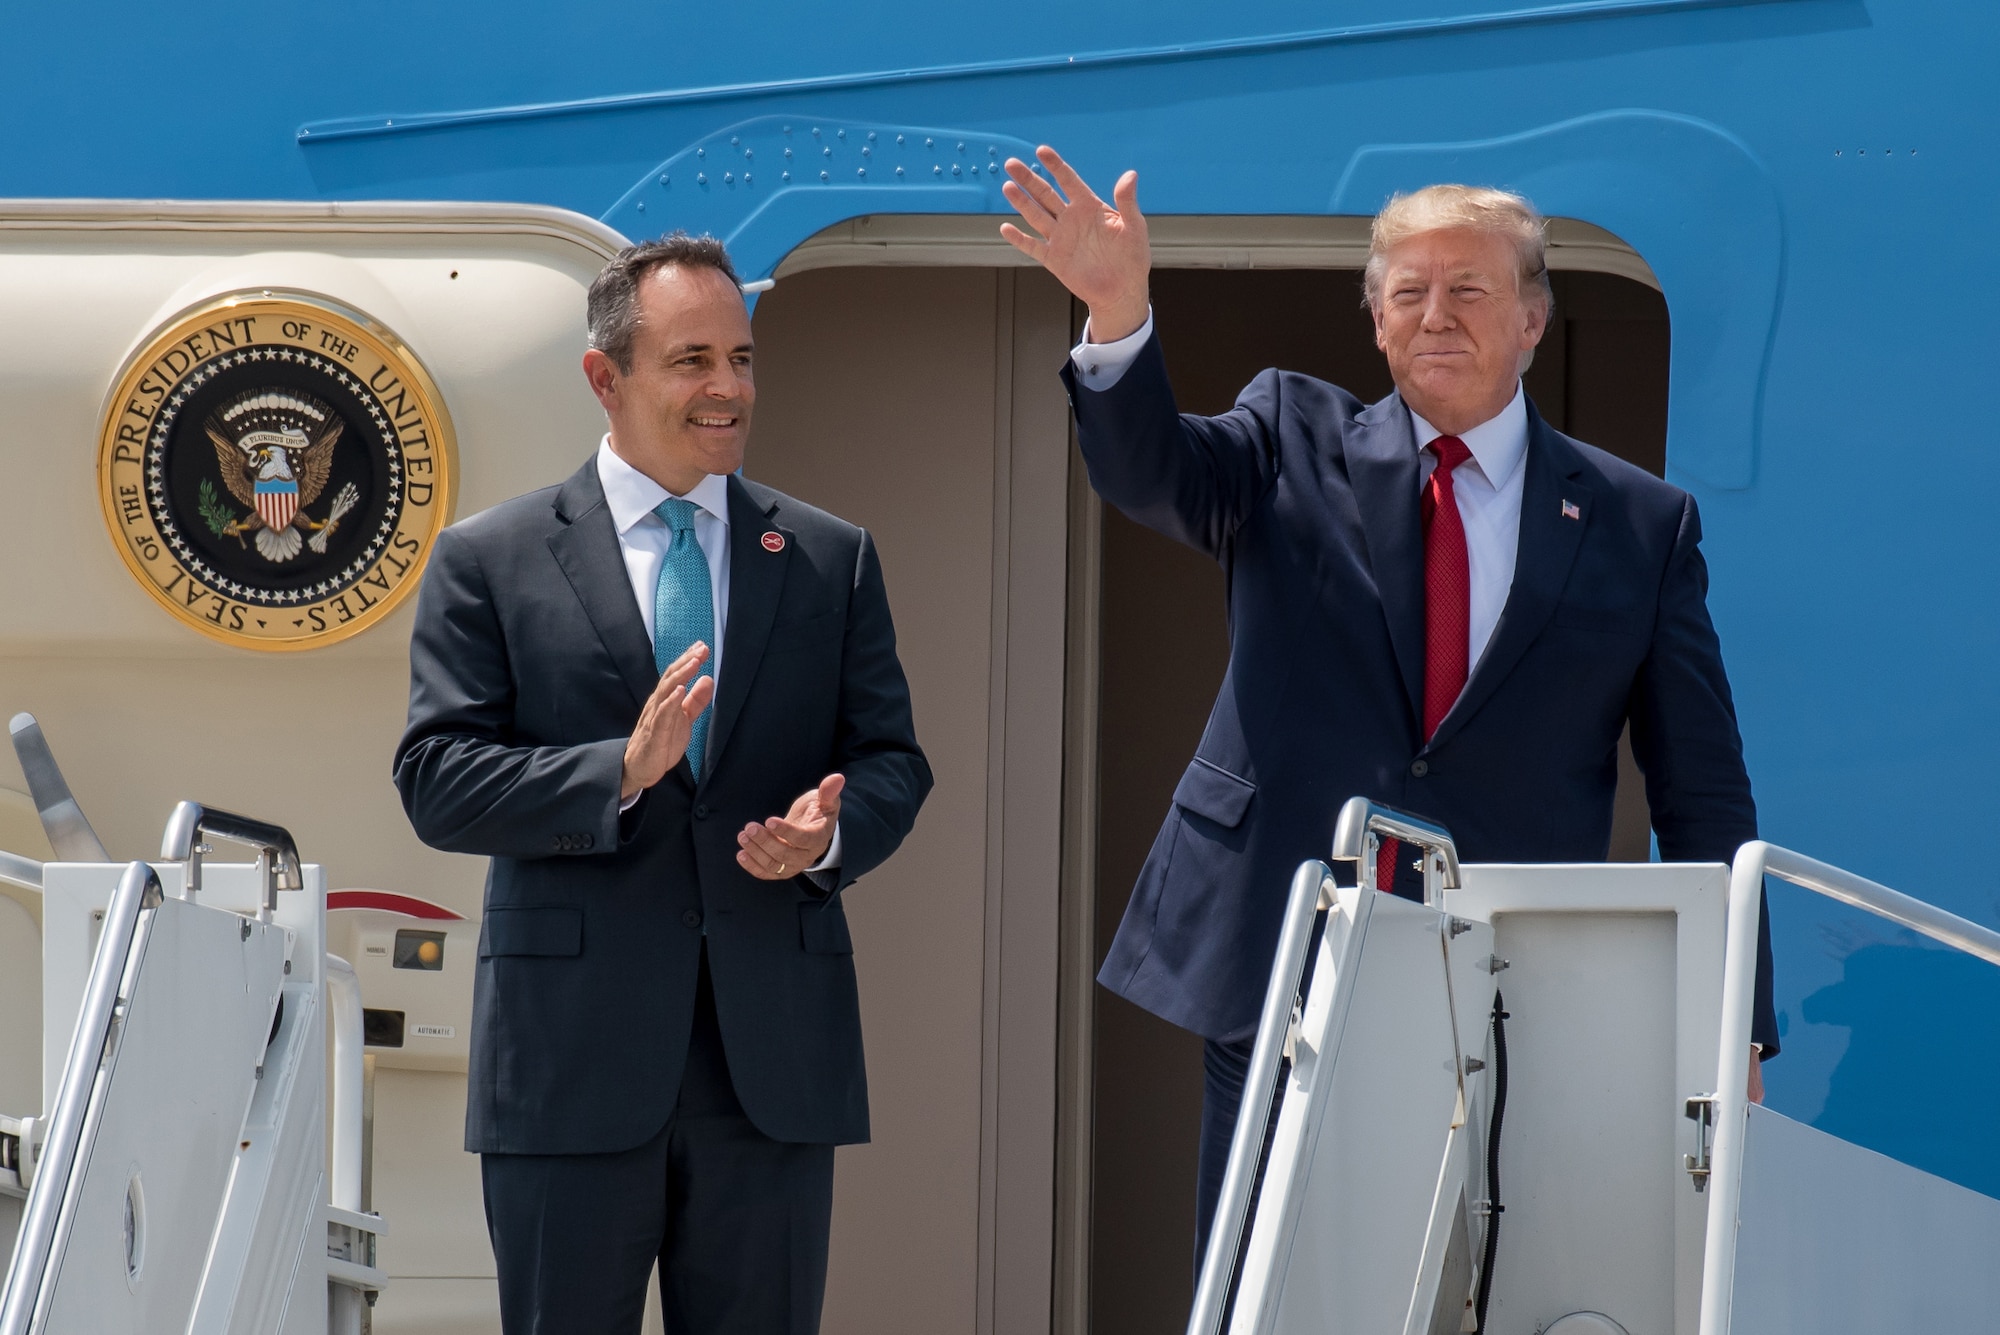 President Donald Trump (right) and Kentucky Gov. Matt Bevin greet supporters as they arrive at the Kentucky Air National Guard Base in Louisville, Ky., Aug. 21, 2019. Trump was in town to speak at an AMVETS convention and attend a fundraiser for Bevin’s re-election campaign. (U.S. Air National Guard photo by Dale Greer)